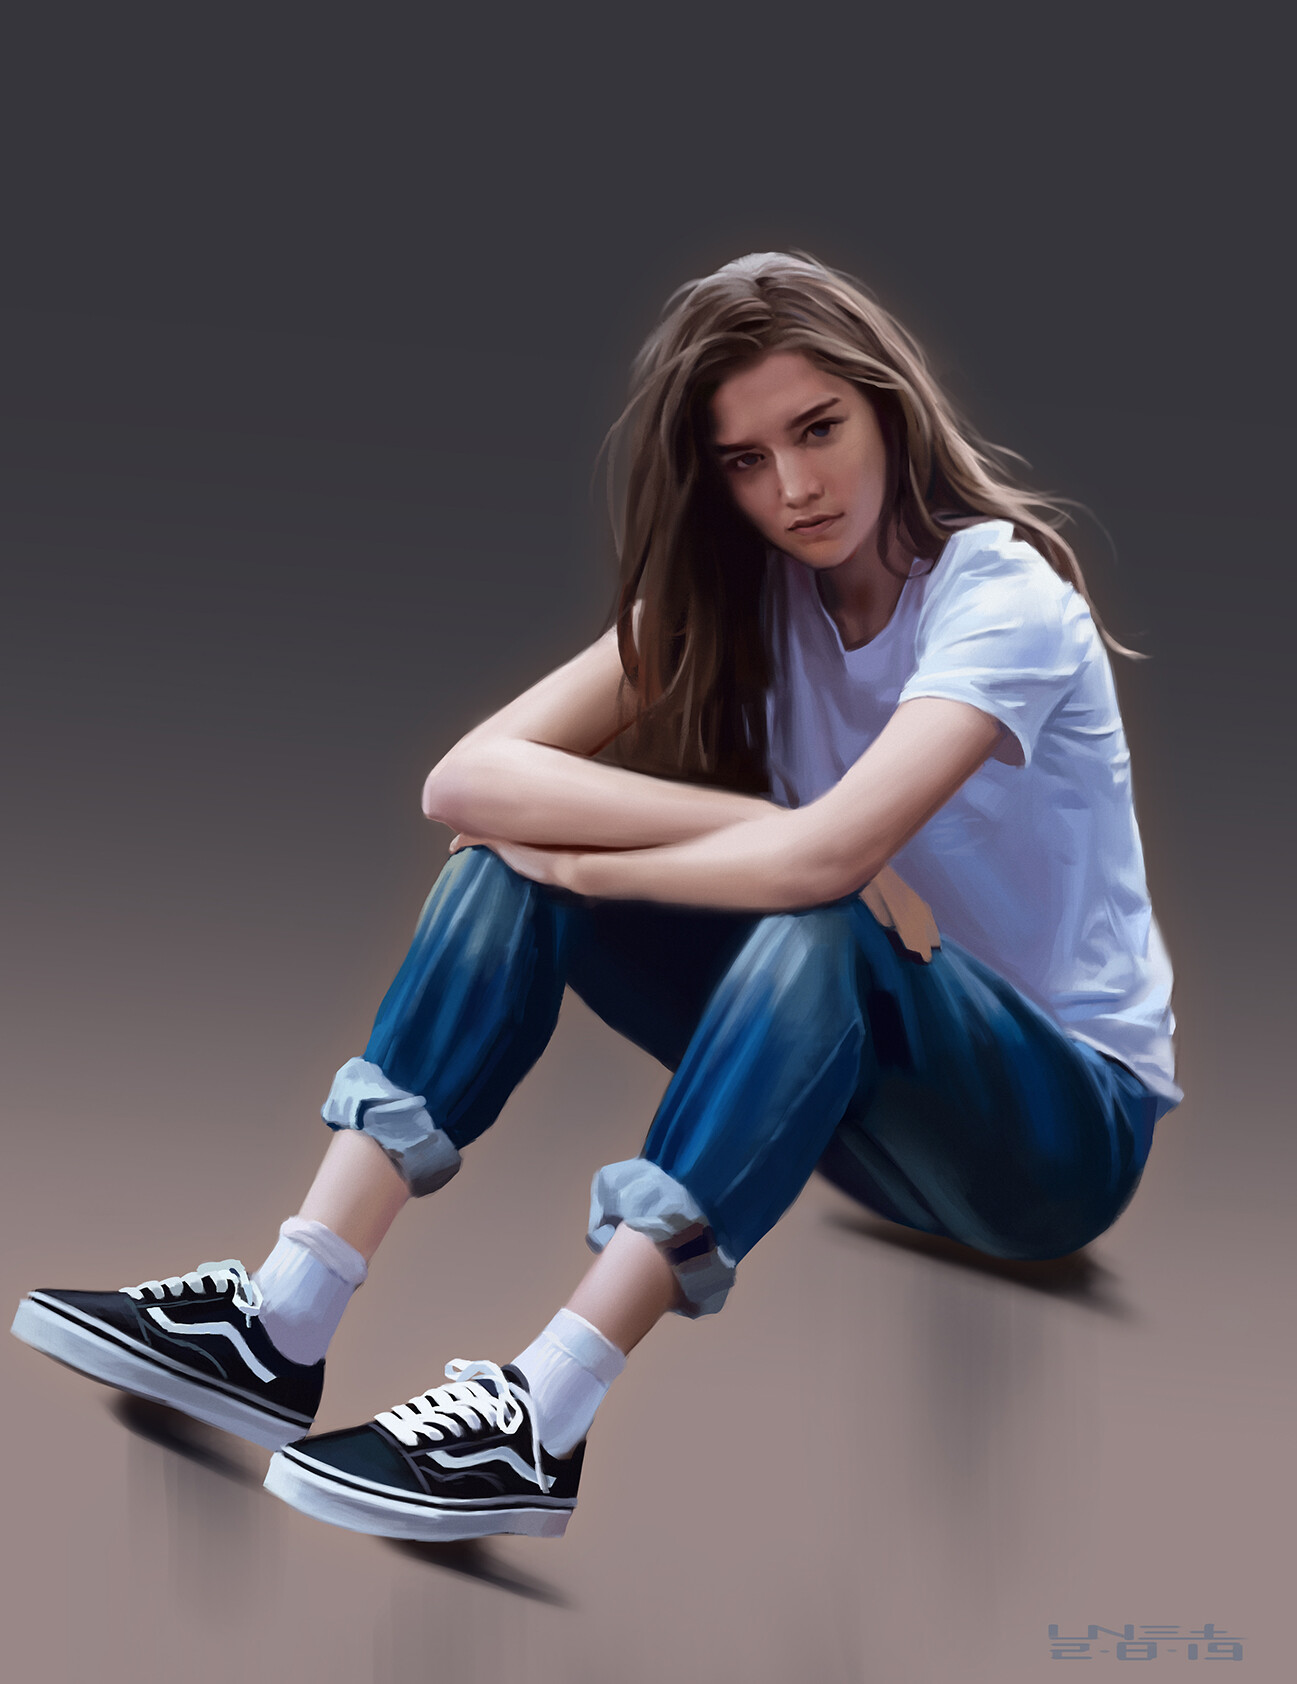 - Daily sketch “Girl wearing Vans”, Ronnie Wong